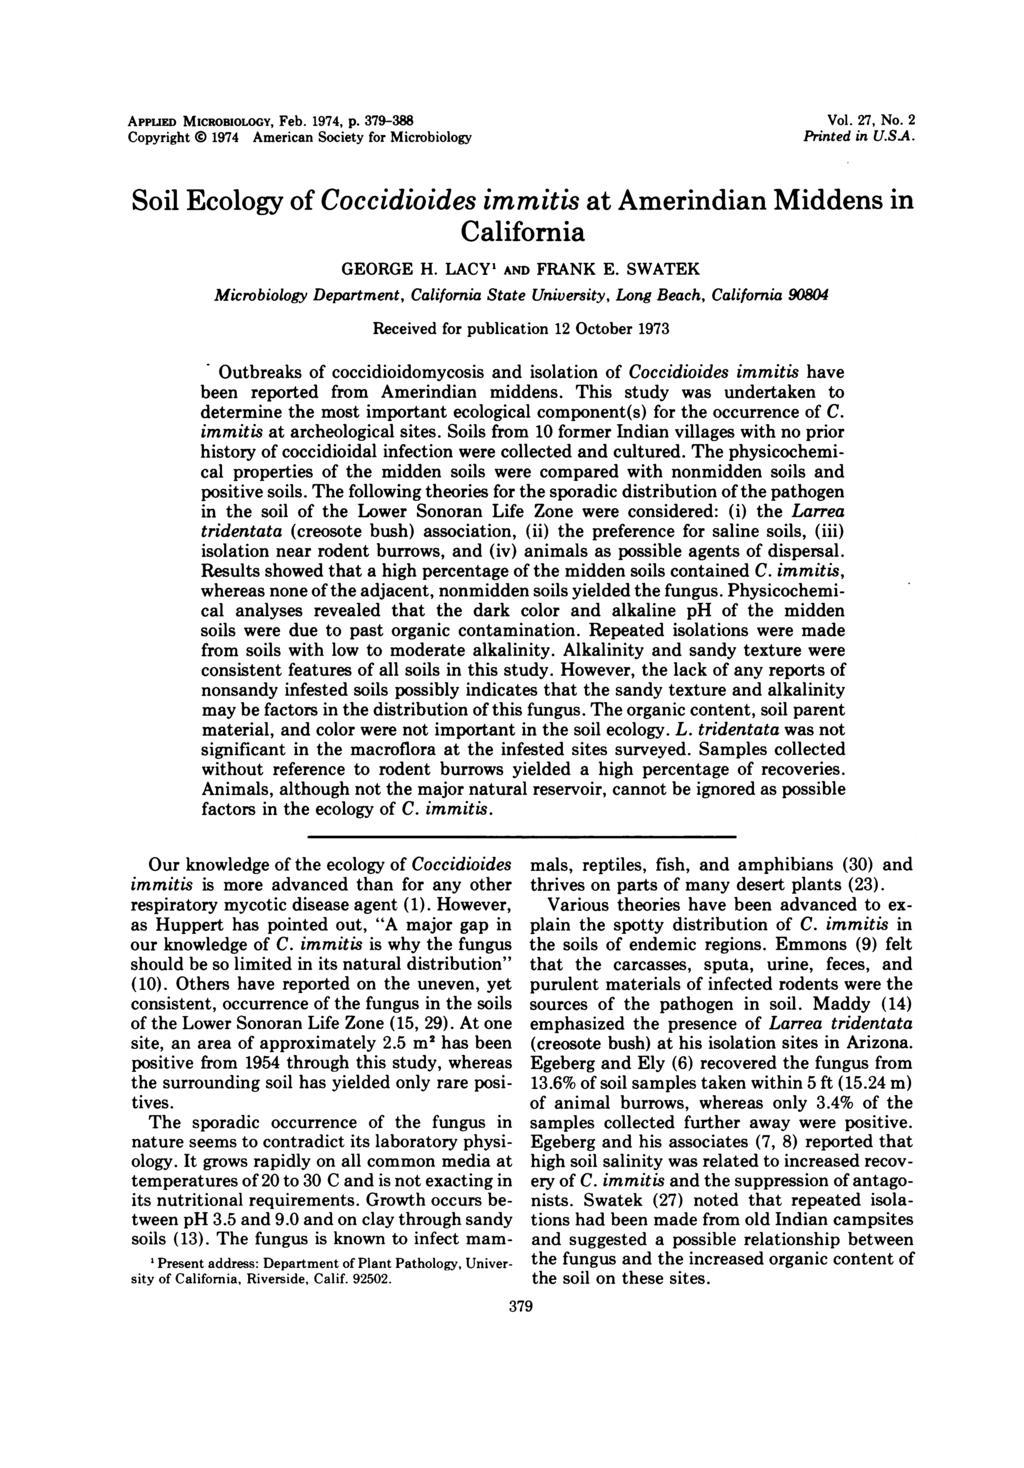 APPLIED MICROBIOLOGY, Feb. 1974, p. 379-388 Copyright i 1974 American Society for Microbiology Vol. 27, No. 2 Printed in U.SA.